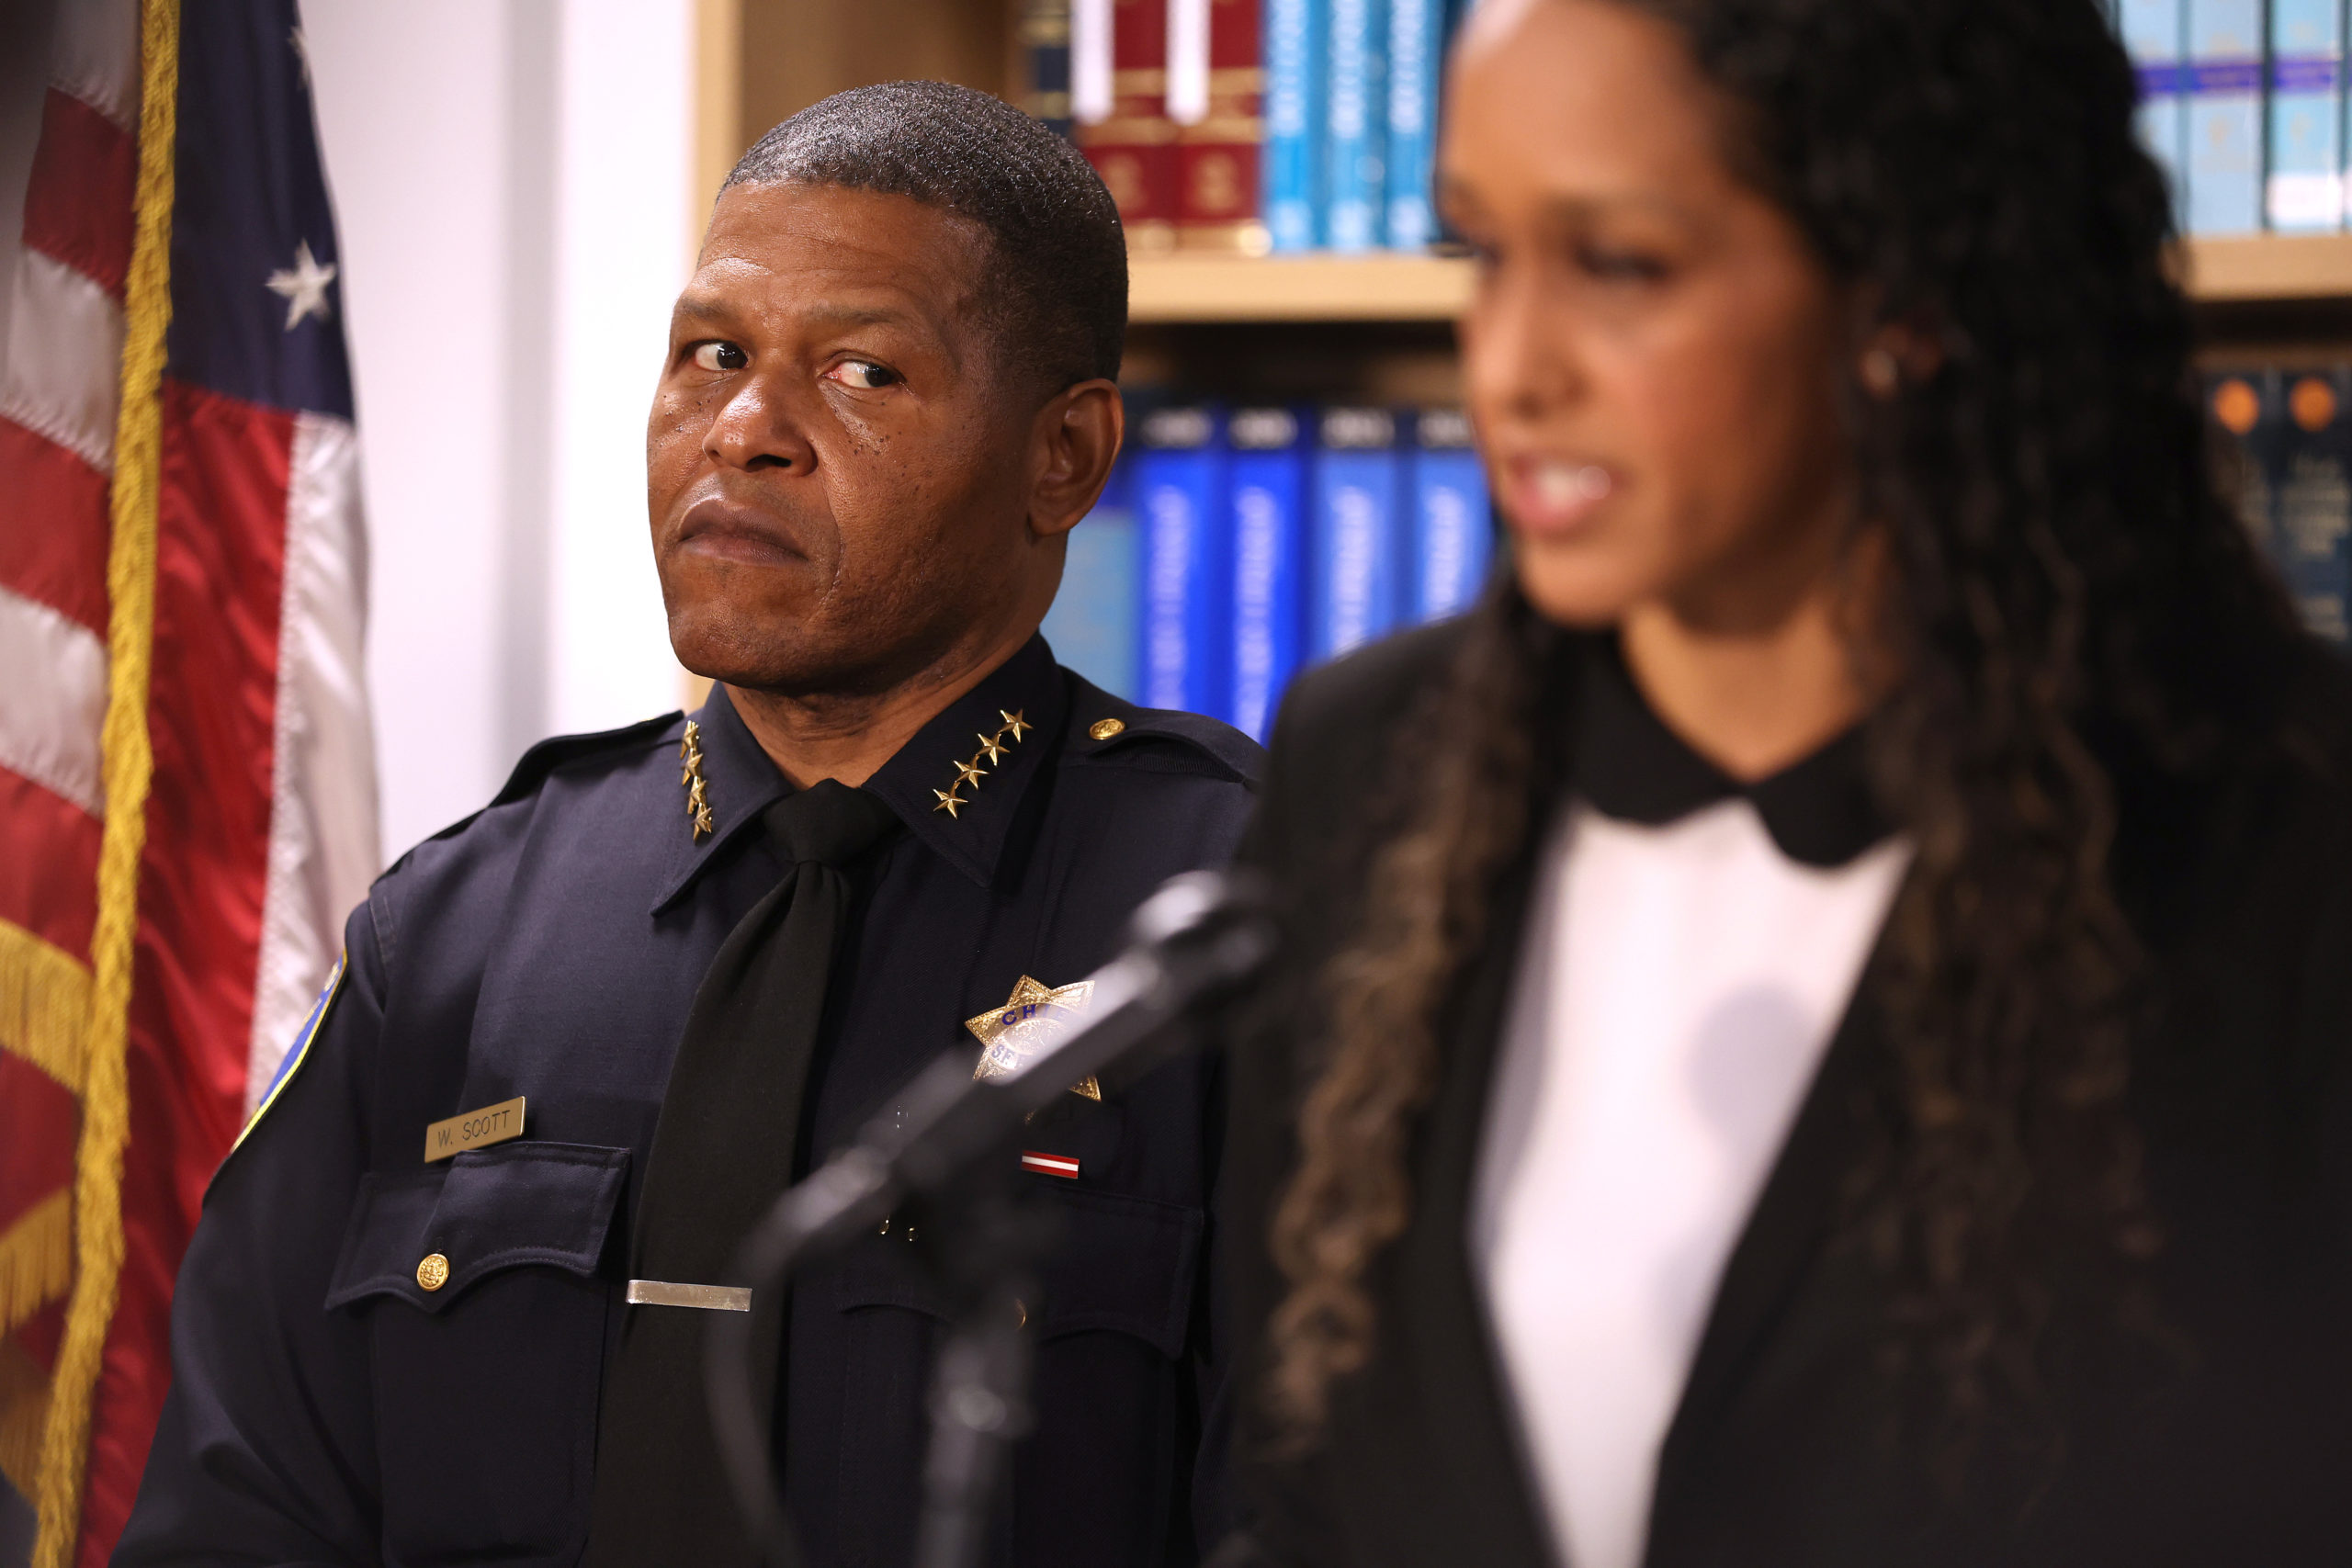 SAN FRANCISCO, CALIFORNIA - OCTOBER 31: San Francisco police chief Bill Scott (L) looks on as San Francisco district attorney Brooke Jenkins during a news conference on October 31, 2022 in San Francisco, California. (Photo by Justin Sullivan/Getty Images)